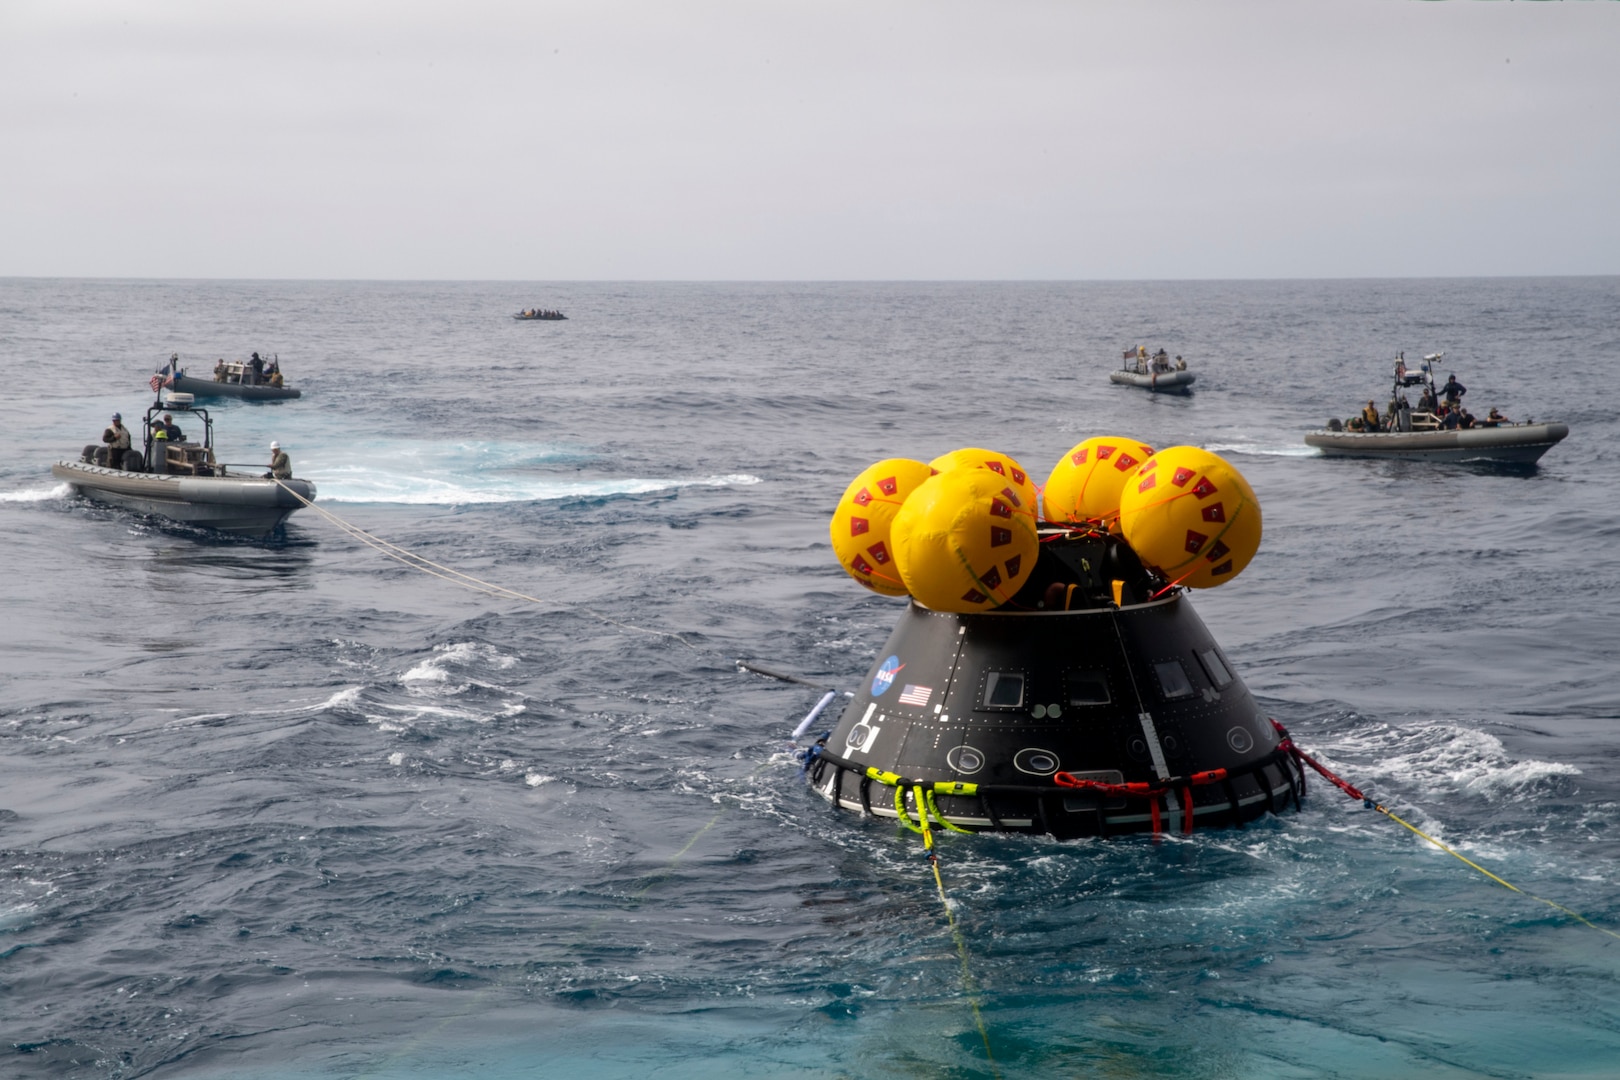 Sailors assigned to amphibious transport dock ship USS John P. Murtha (LPD 26) and Explosive Ordnance Disposal Expeditionary Support Unit 1 launch the Vehicle Advanced Demonstrator for Emergency Recovery, “VADR”, during Underway Recovery Test (URT) 10, July 27, 2023. VADR is a replica of the crew module that will be used during Artemis II. In preparation for NASA's Artemis II crewed mission, which will send four astronauts in Orion beyond the Moon, NASA and the U.S. Navy will conduct a series of tests to demonstrate and evaluate the processes, procedures, and hardware used in recovery operations for crewed lunar missions. The U.S. Navy has many unique capabilities that make it an ideal partner to support NASA, including its amphibious capabilities with the ability to embark helicopters, launch and recover small boats, three-dimensional air search radar and advanced medical facilities. (U.S. Navy Photo by Mass Communication Specialist 2nd Class Joshua Samoluk)